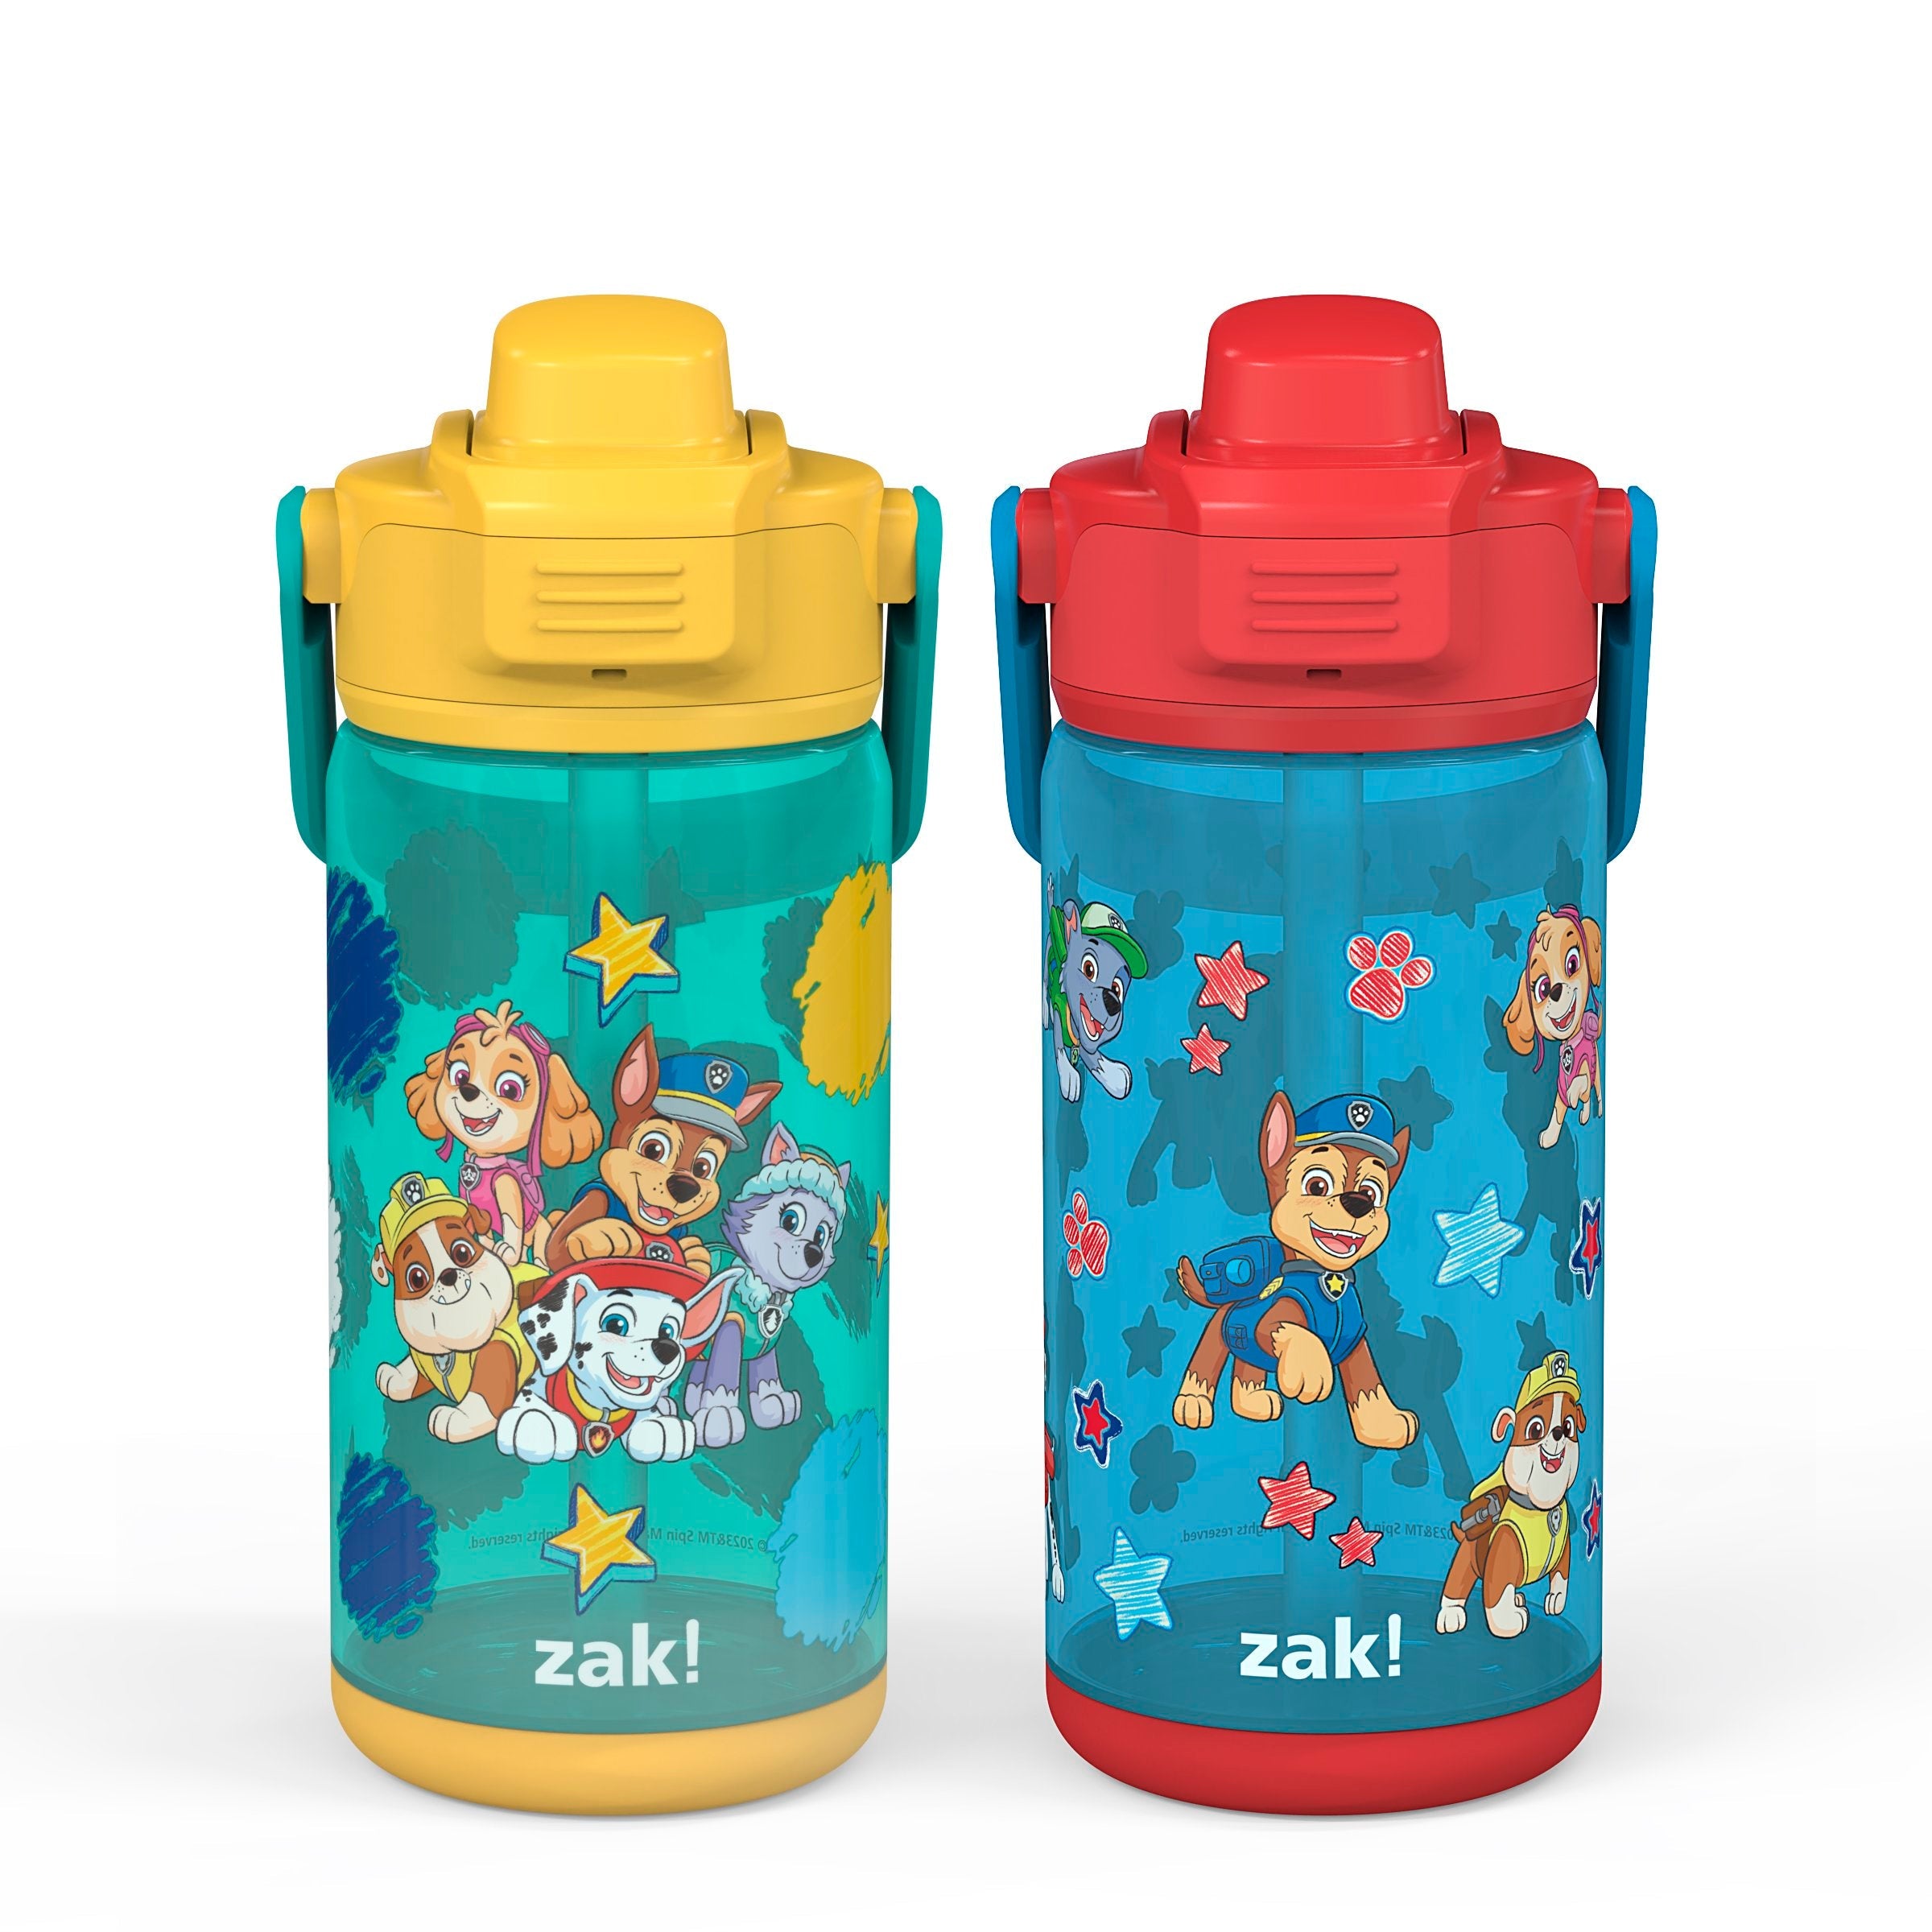 Zak Designs PAW Patrol Kelso Toddler Cups For Travel or At Home, 12oz  Vacuum Insulated Stainless Ste…See more Zak Designs PAW Patrol Kelso  Toddler